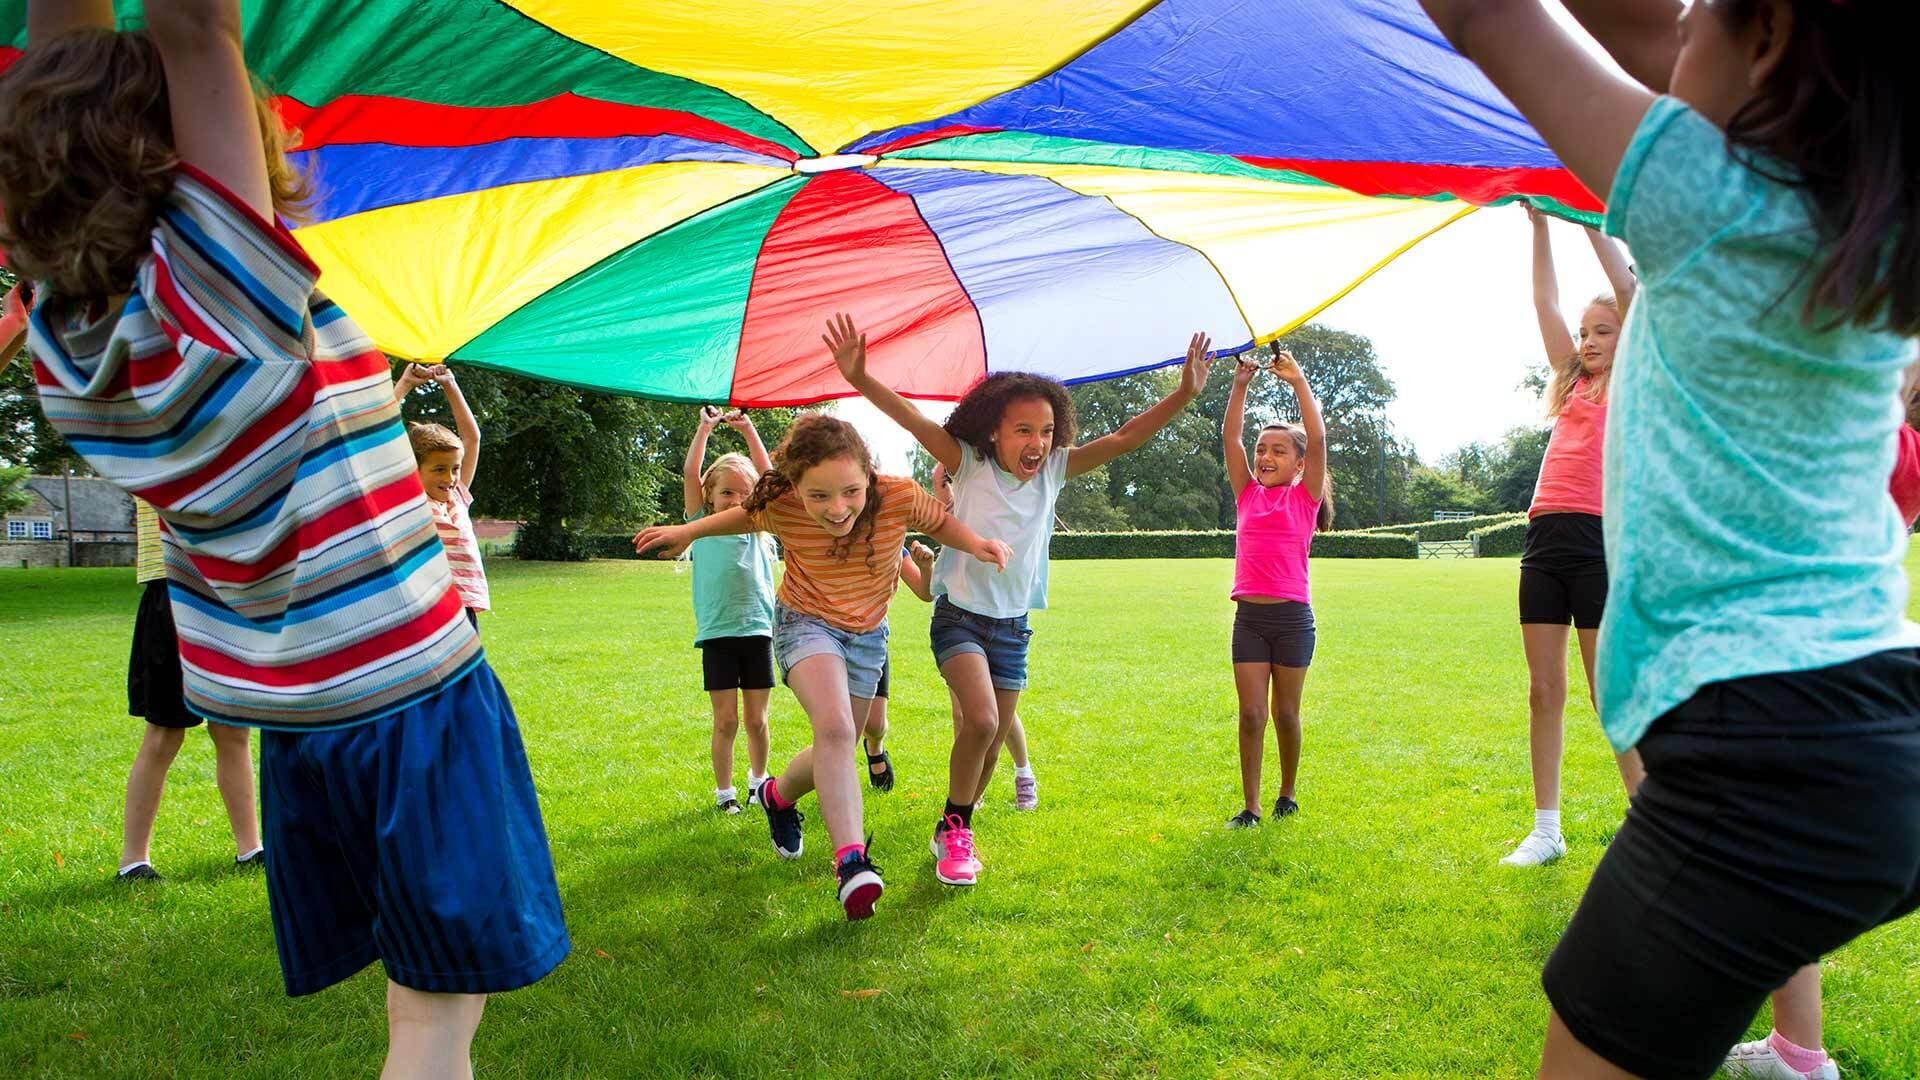 Children play with parachute